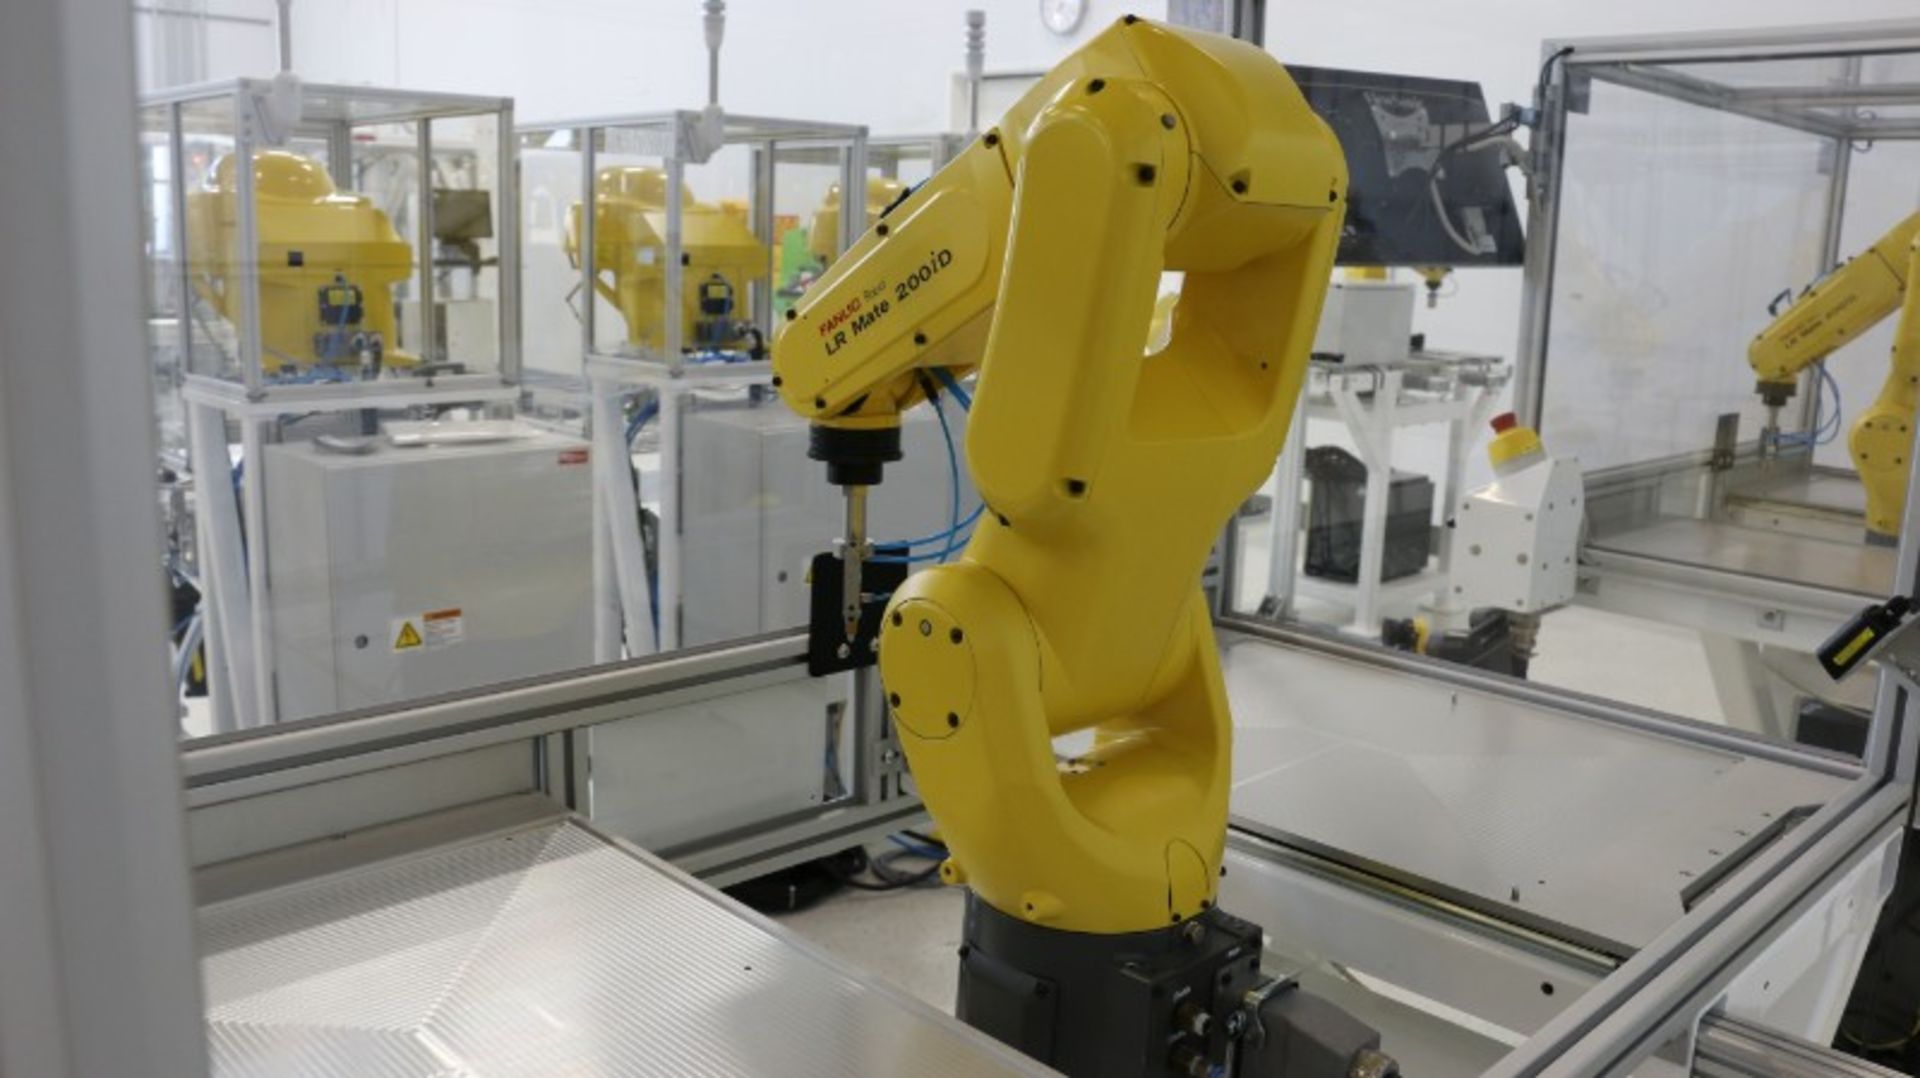 Fanuc Model LR Mate 200iD 6 Axis Robot - Image 5 of 7